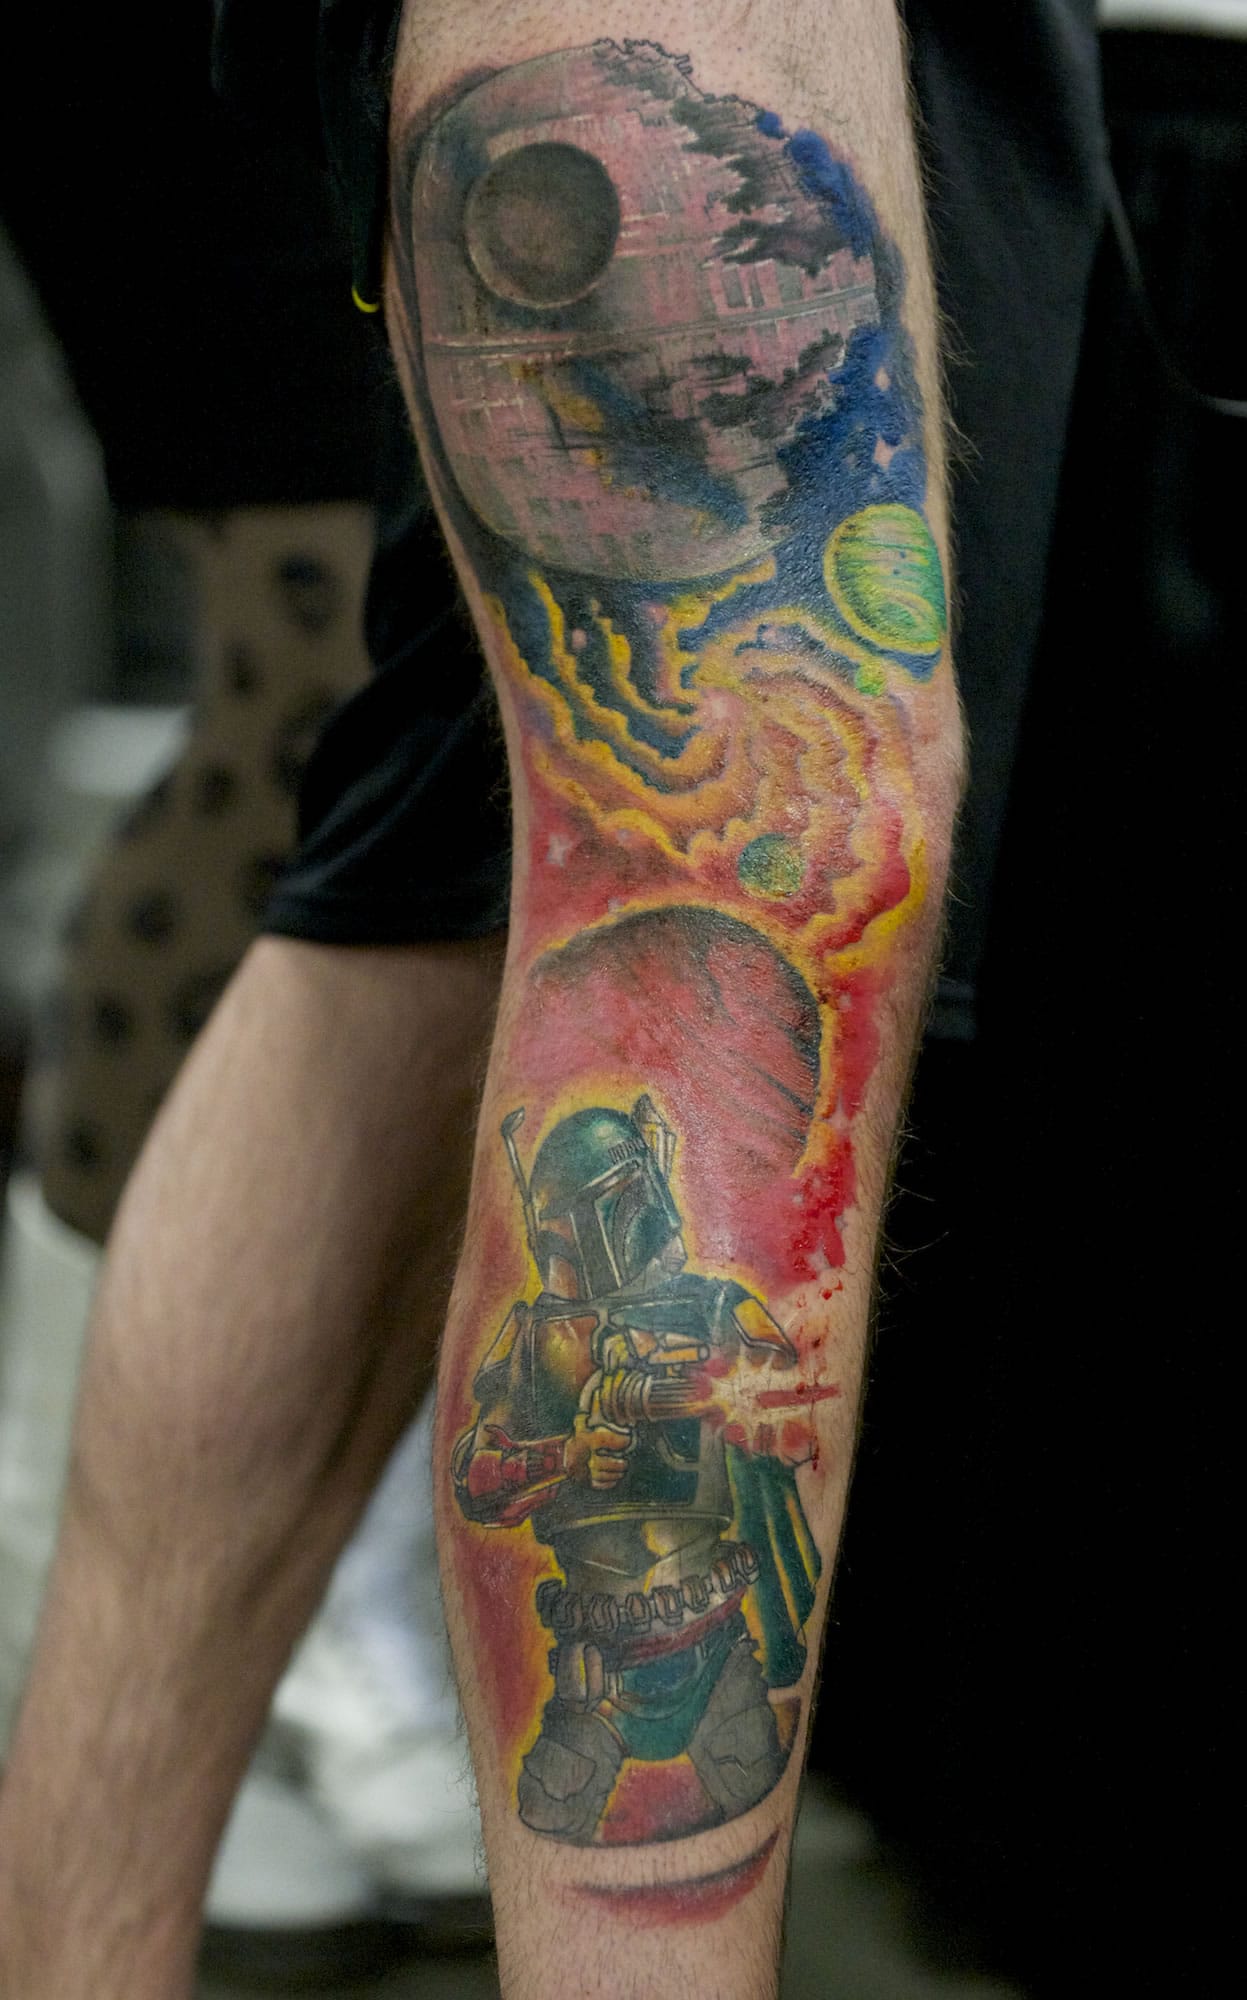 Vancouver's Evan Bastian, 25, shows the Star Wars tattoo that was judged the best of the day on Saturday.